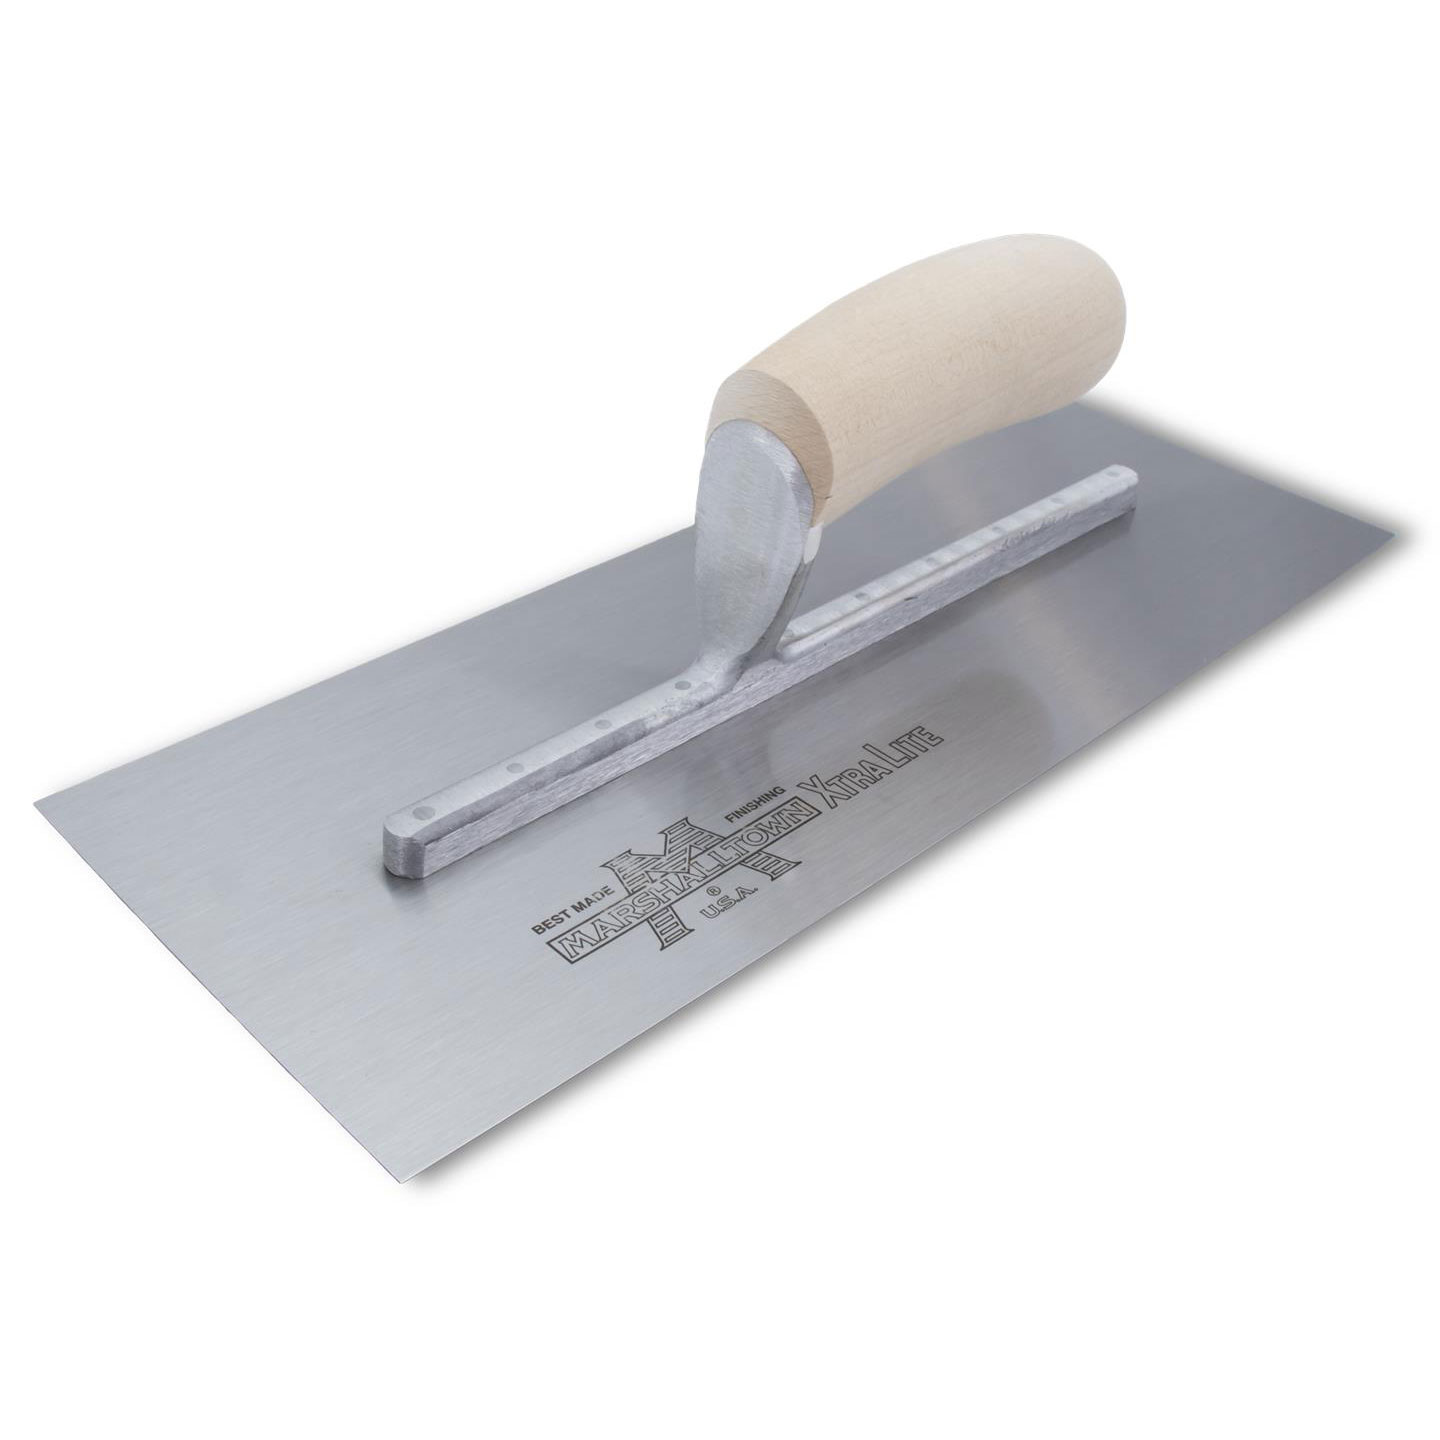 Marshalltown MXS65 14in x 4-1/2in Finishing Trowel with Curved Wood Handle MXS65